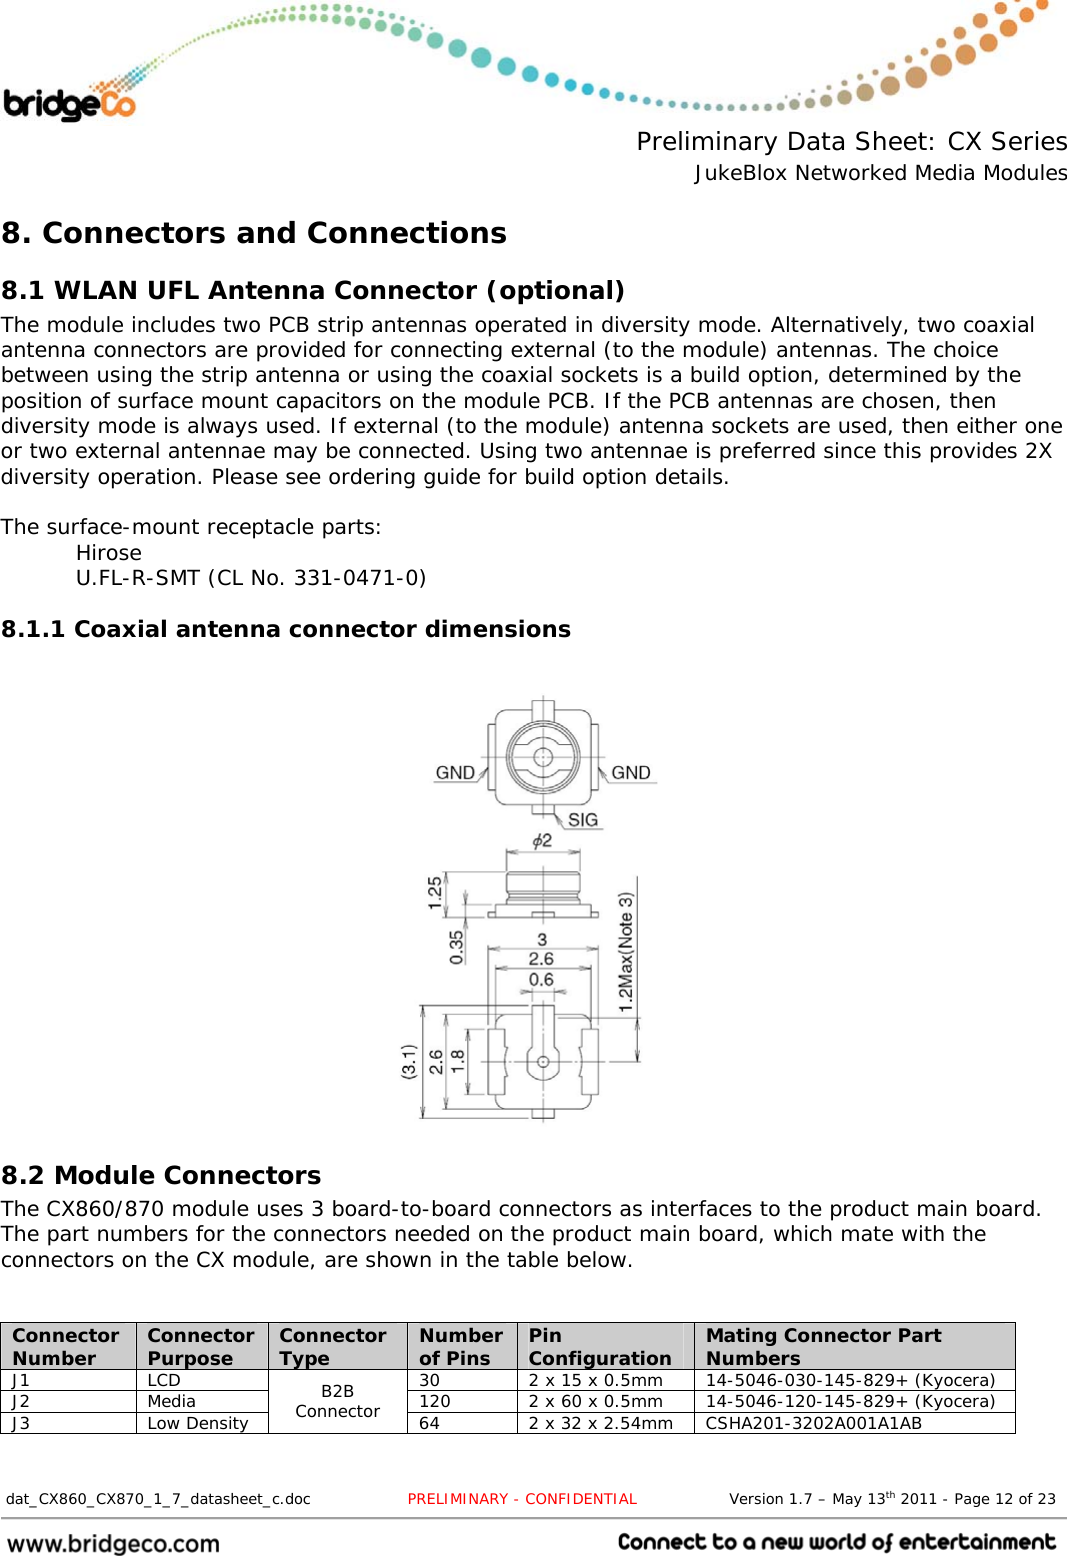  Preliminary Data Sheet: CX Series JukeBlox Networked Media Modules  dat_CX860_CX870_1_7_datasheet_c.doc                   PRELIMINARY - CONFIDENTIAL                  Version 1.7 – May 13th 2011 - Page 12 of 23                                 8. Connectors and Connections 8.1 WLAN UFL Antenna Connector (optional) The module includes two PCB strip antennas operated in diversity mode. Alternatively, two coaxial antenna connectors are provided for connecting external (to the module) antennas. The choice between using the strip antenna or using the coaxial sockets is a build option, determined by the position of surface mount capacitors on the module PCB. If the PCB antennas are chosen, then diversity mode is always used. If external (to the module) antenna sockets are used, then either one or two external antennae may be connected. Using two antennae is preferred since this provides 2X diversity operation. Please see ordering guide for build option details.  The surface-mount receptacle parts:  Hirose   U.FL-R-SMT (CL No. 331-0471-0) 8.1.1 Coaxial antenna connector dimensions                  8.2 Module Connectors The CX860/870 module uses 3 board-to-board connectors as interfaces to the product main board. The part numbers for the connectors needed on the product main board, which mate with the connectors on the CX module, are shown in the table below.   Connector Number  Connector Purpose  Connector Type  Number of Pins  Pin Configuration  Mating Connector Part Numbers J1  LCD  30  2 x 15 x 0.5mm  14-5046-030-145-829+ (Kyocera) J2  Media  120  2 x 60 x 0.5mm  14-5046-120-145-829+ (Kyocera) J3 Low Density B2B Connector  64  2 x 32 x 2.54mm  CSHA201-3202A001A1AB  